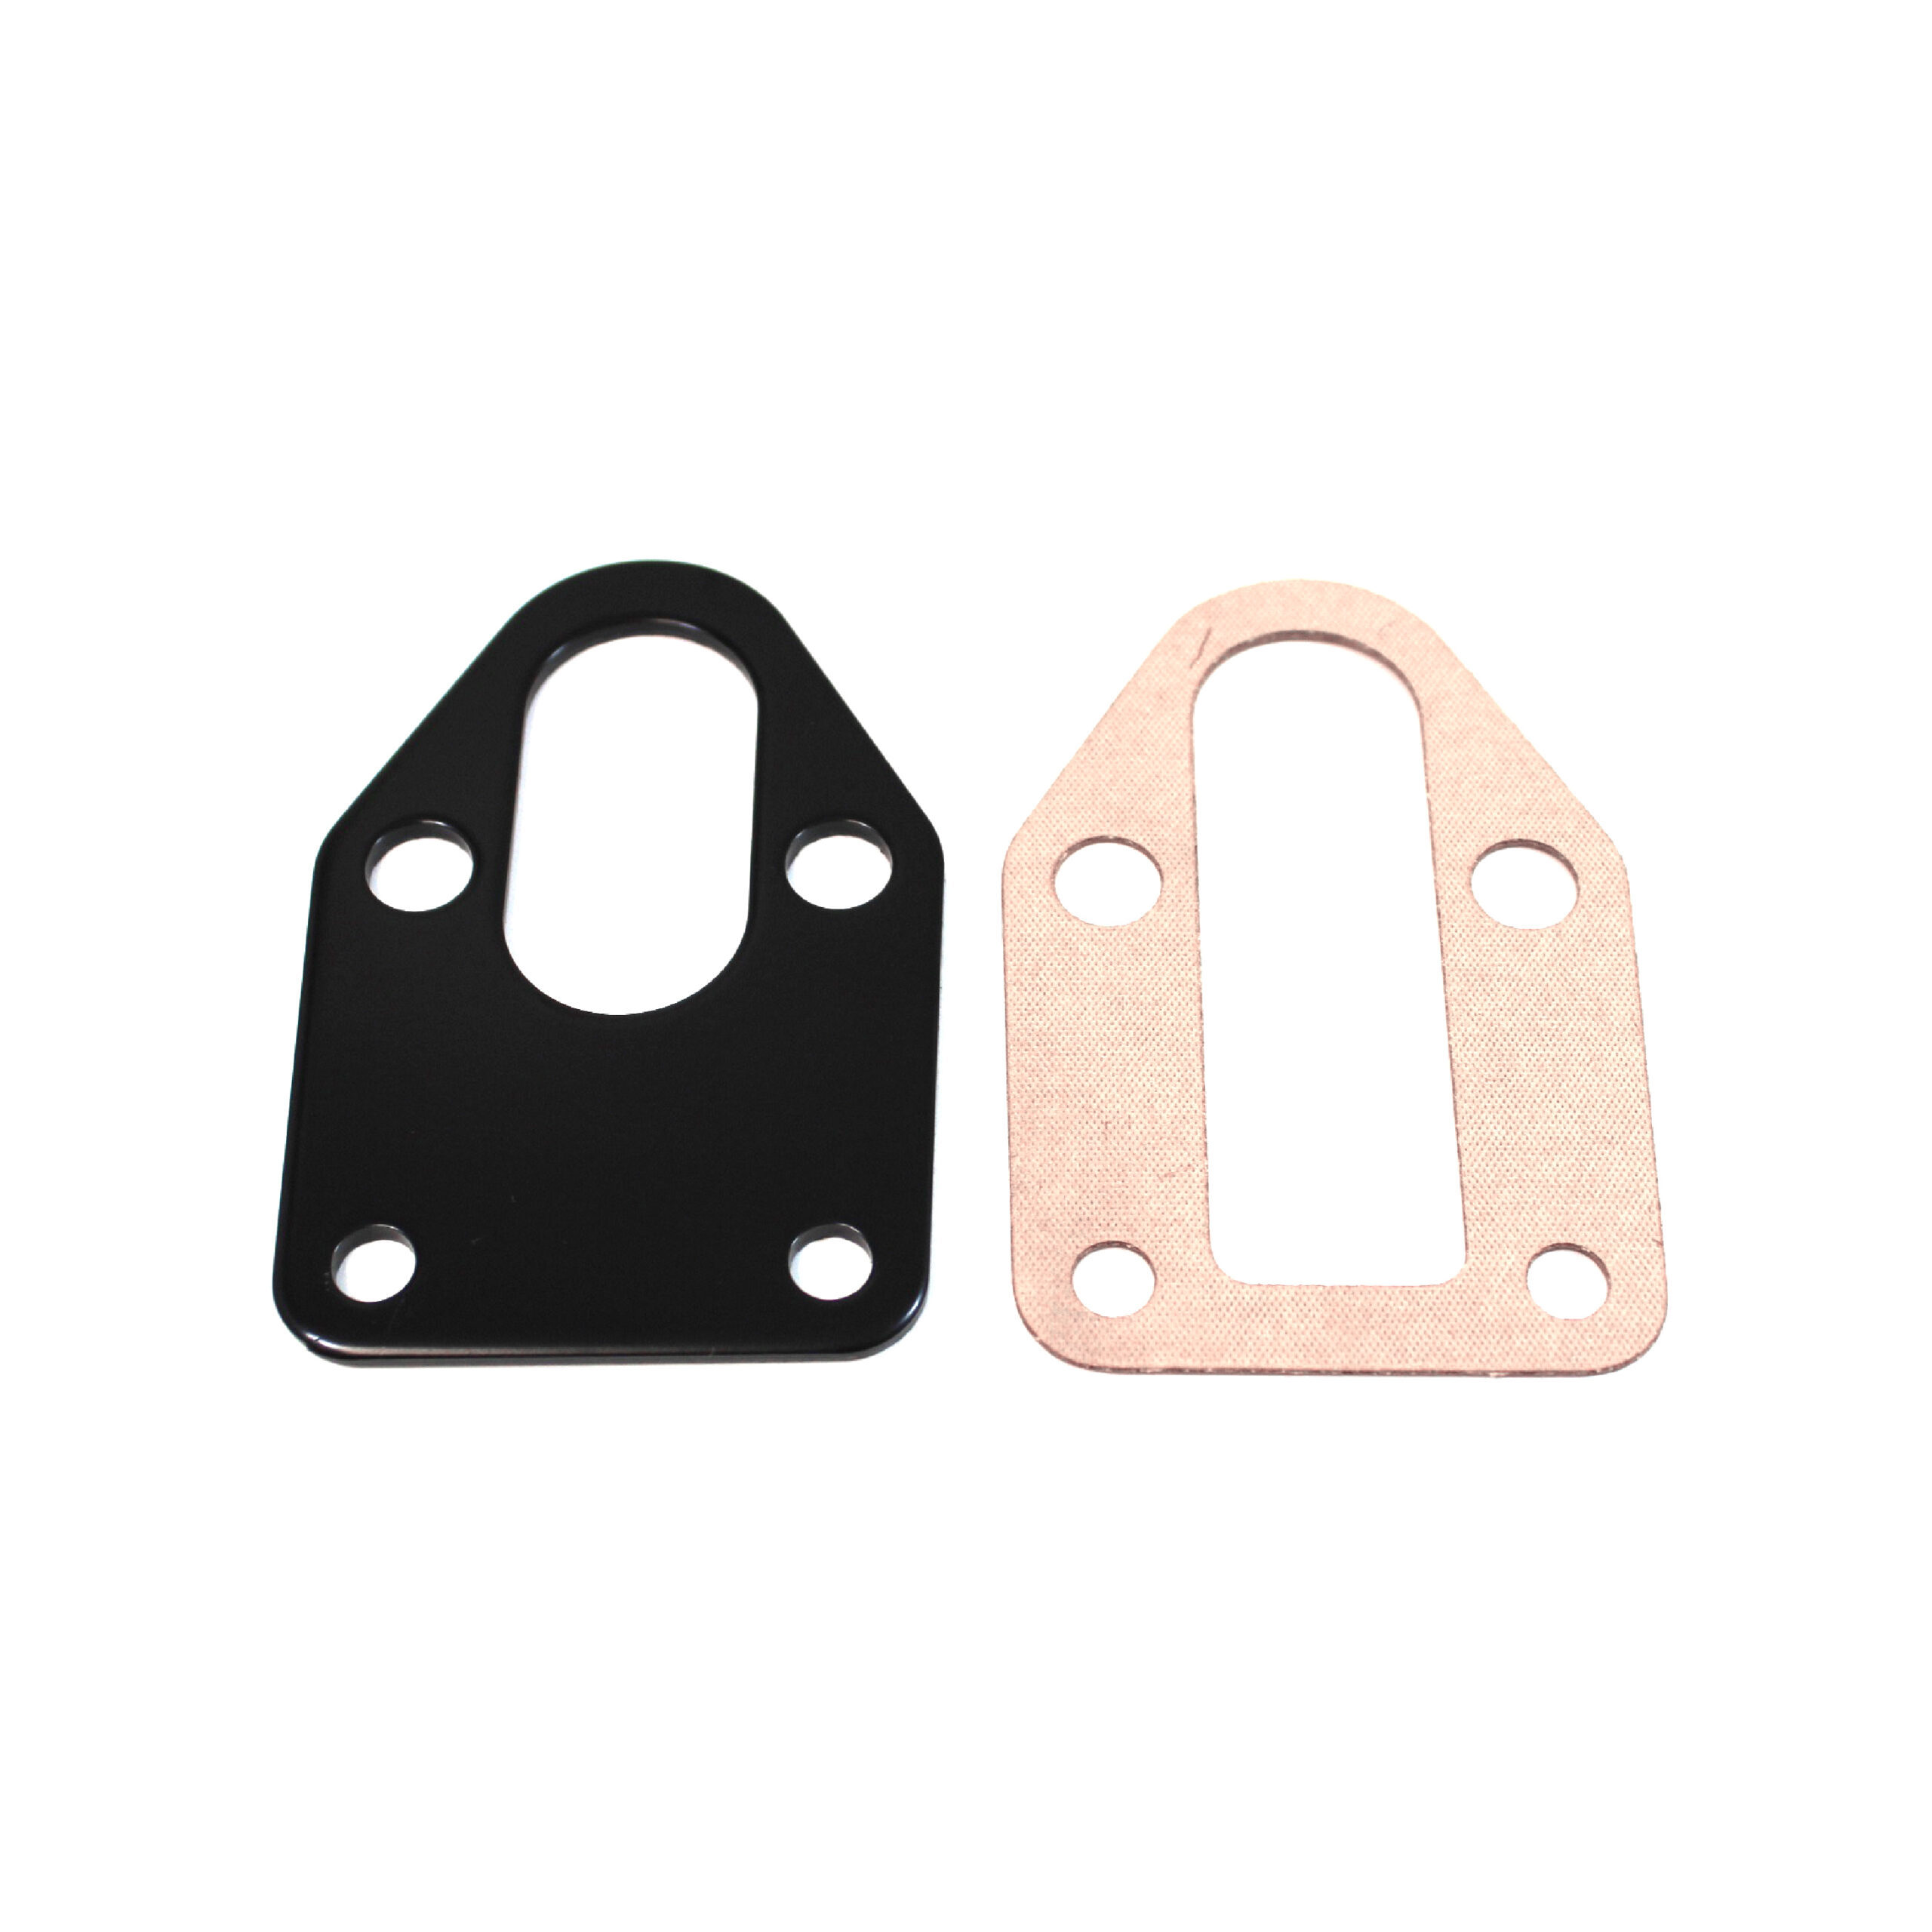 Racing Power Company R2310BK Fuel Pump Mounting Plate, Gasket Included, Steel, Black, Paint, Small Block Chevy, Each